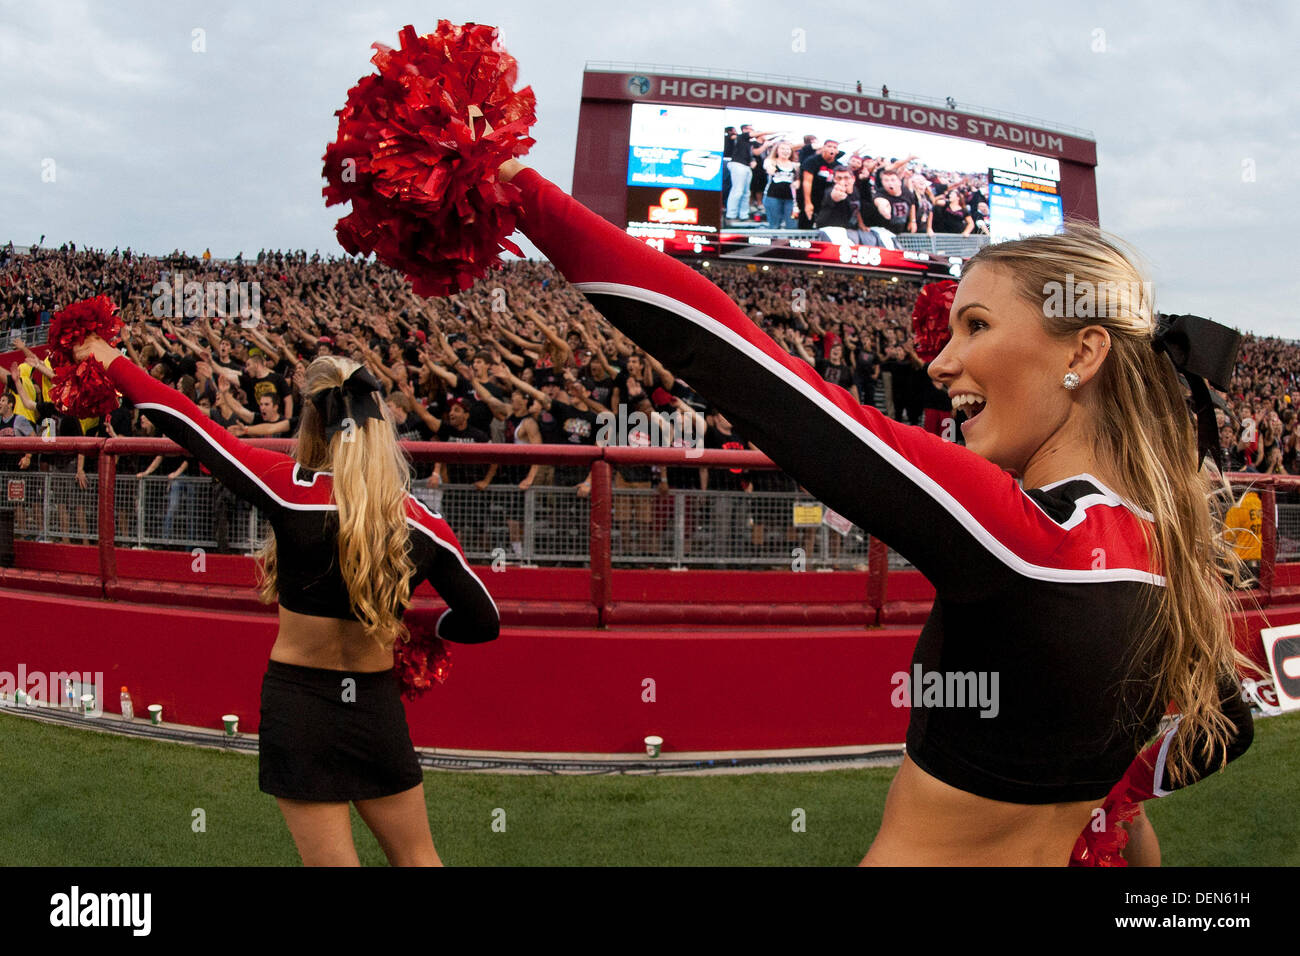 Piscataway, New Jersey, USA. 21st Sep, 2013. September 21, 2013: The Rutgers Scarlet Knights cheerleaders get the crowd involved during the game between Arkansas Razorbacks and Rutgers Scarlet Knights at Highpoint Solutions Stadium in Piscataway, NJ. Rutgers Scarlet Knights defeated The Arkansas Razorbacks 28-24. Credit:  csm/Alamy Live News Stock Photo